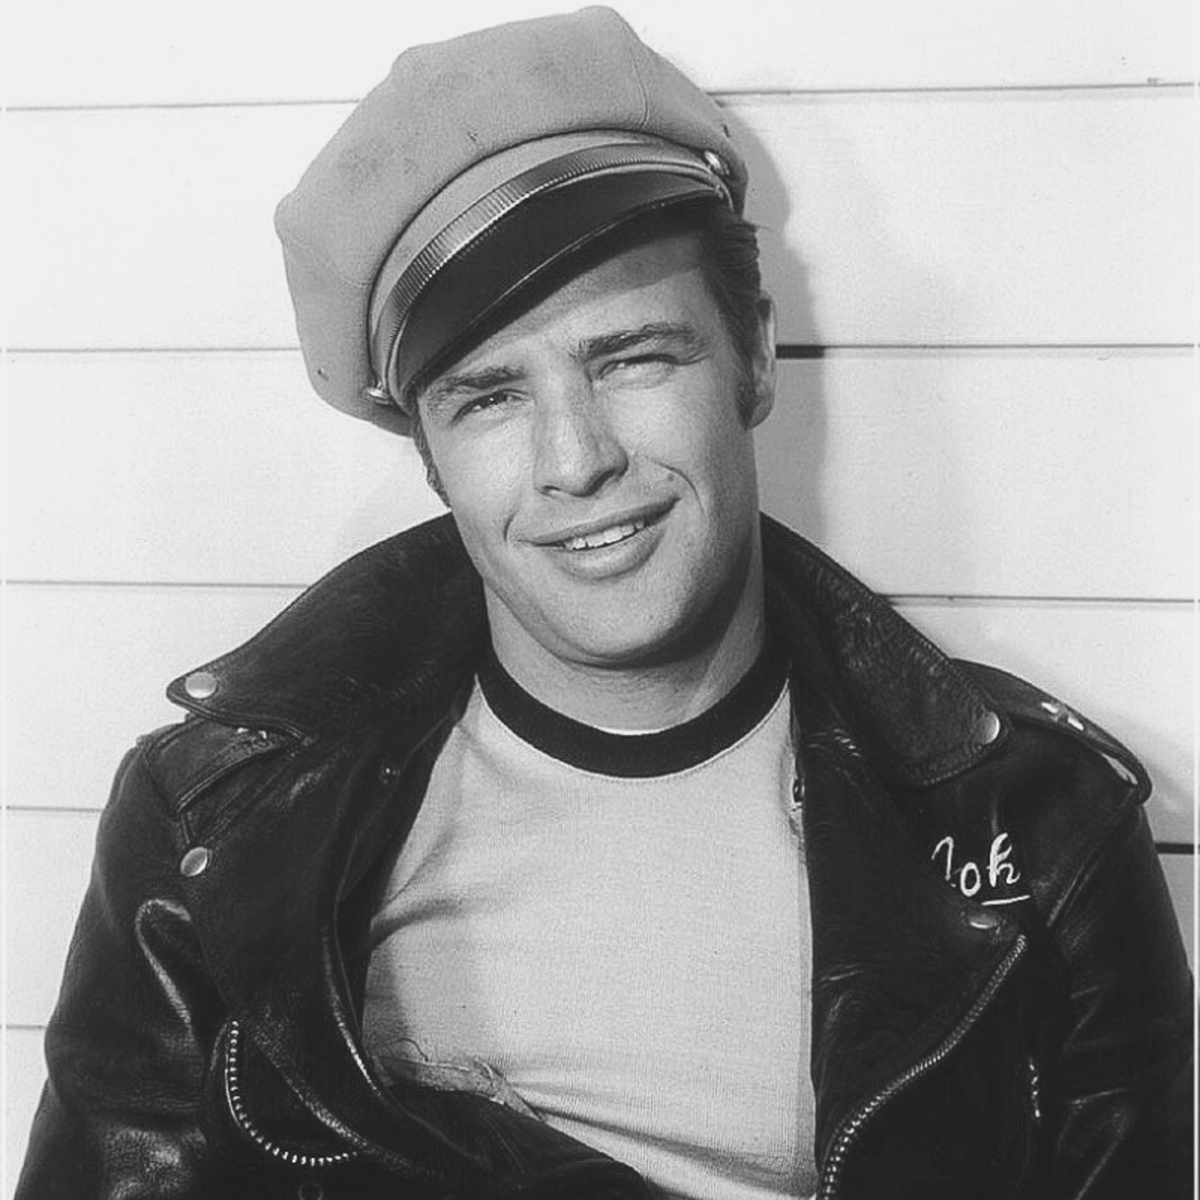 Here, a young Marlin Brando pairs an open leather jacket with a slim-fitting plain tee. 